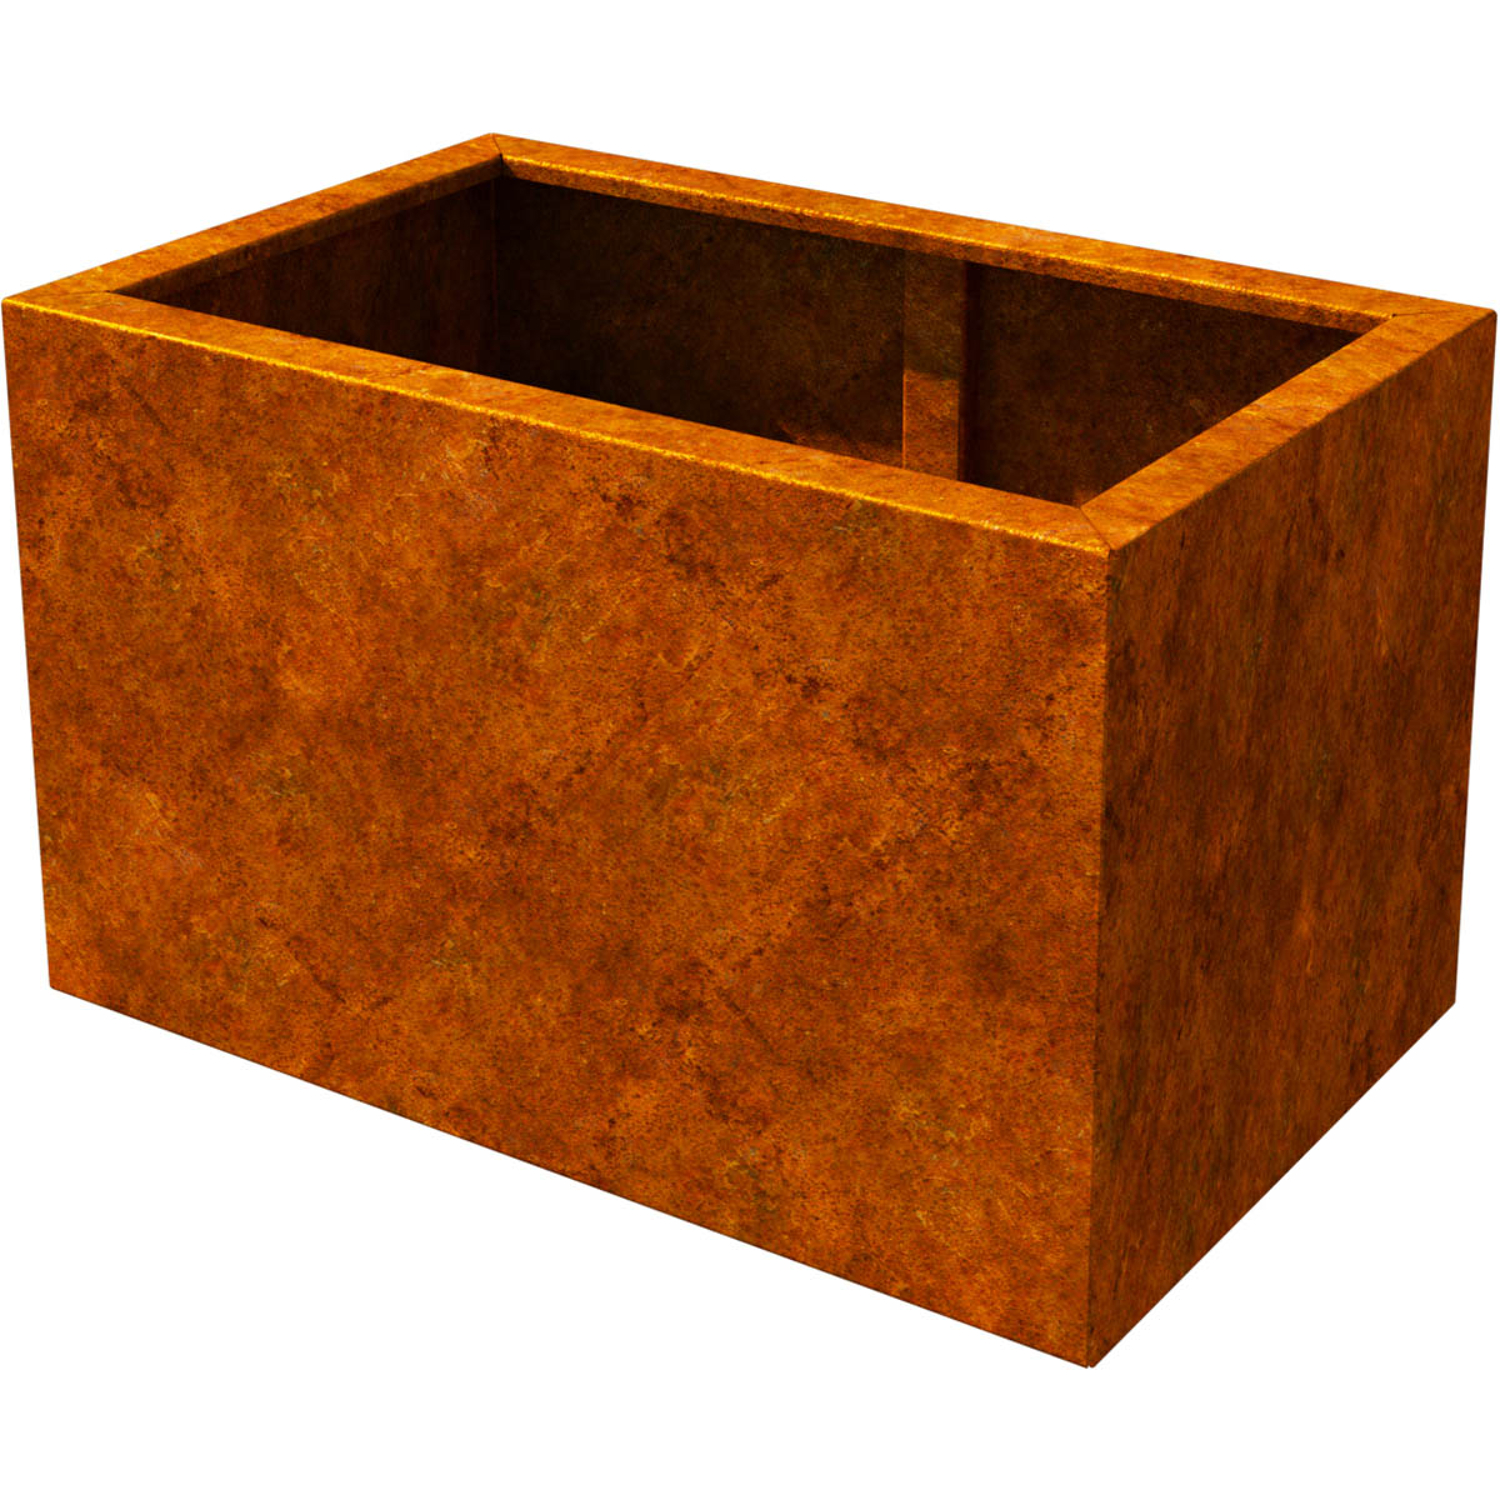 FOREST STYLE - Bac rectangulaire 79x49cm CORTEN